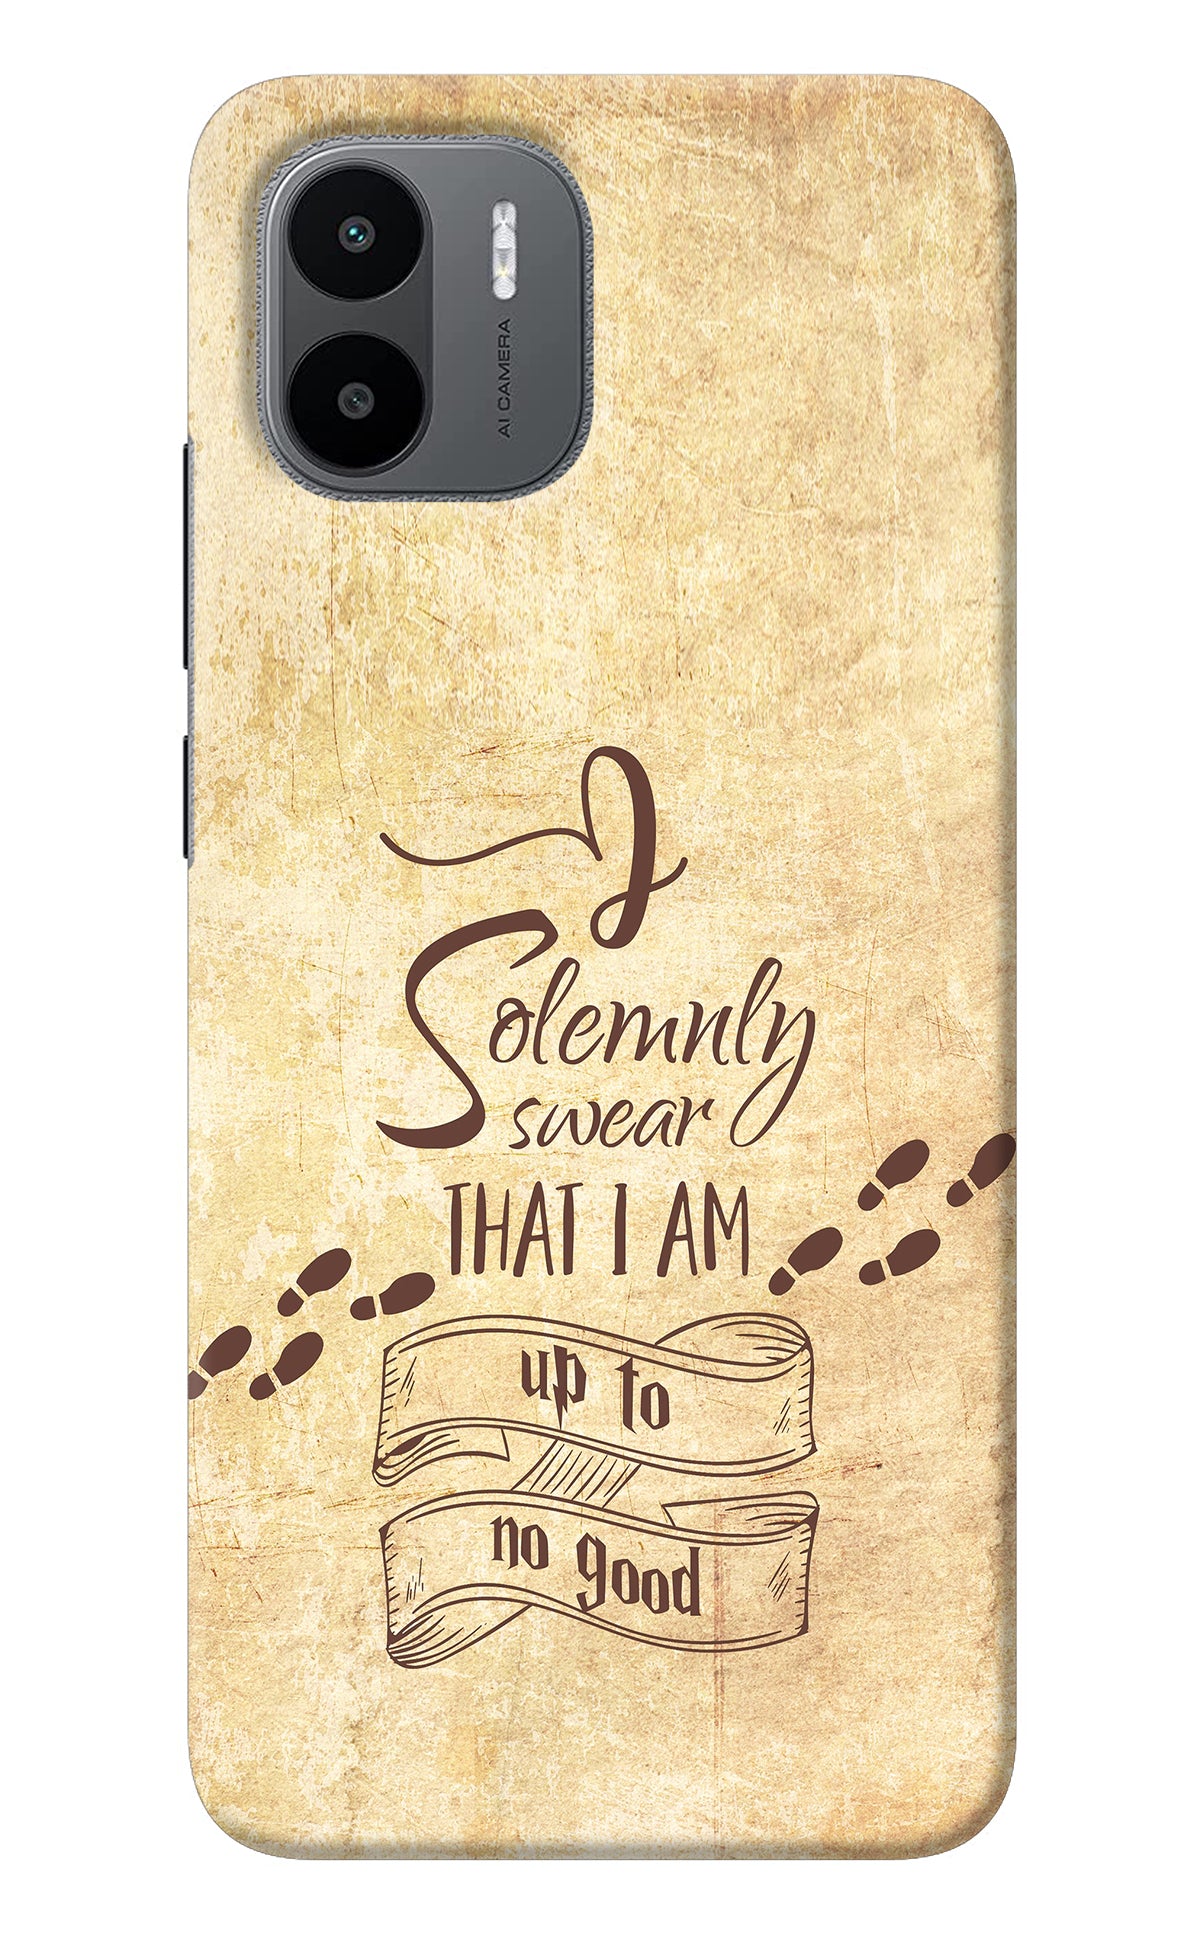 I Solemnly swear that i up to no good Redmi A1 Back Cover